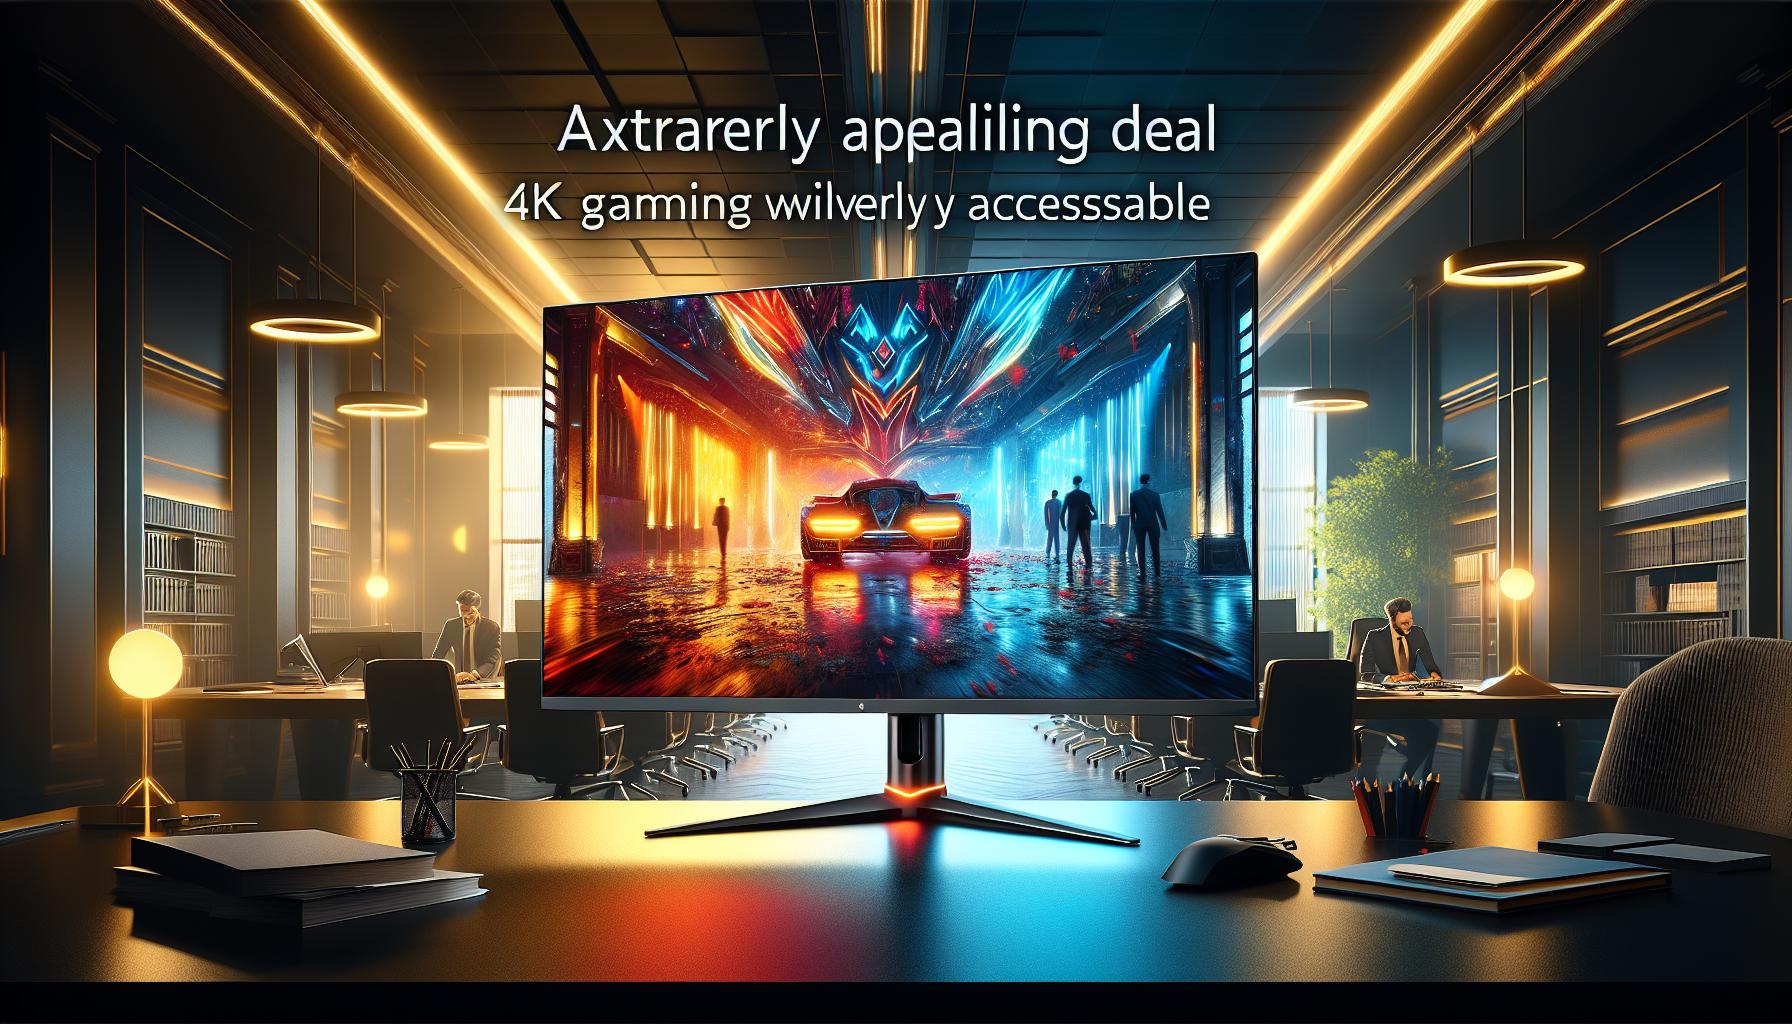 Amazon Offers Discount on LG UltraGear Monitor, Making 4K Gaming More Affordable | FinOracle